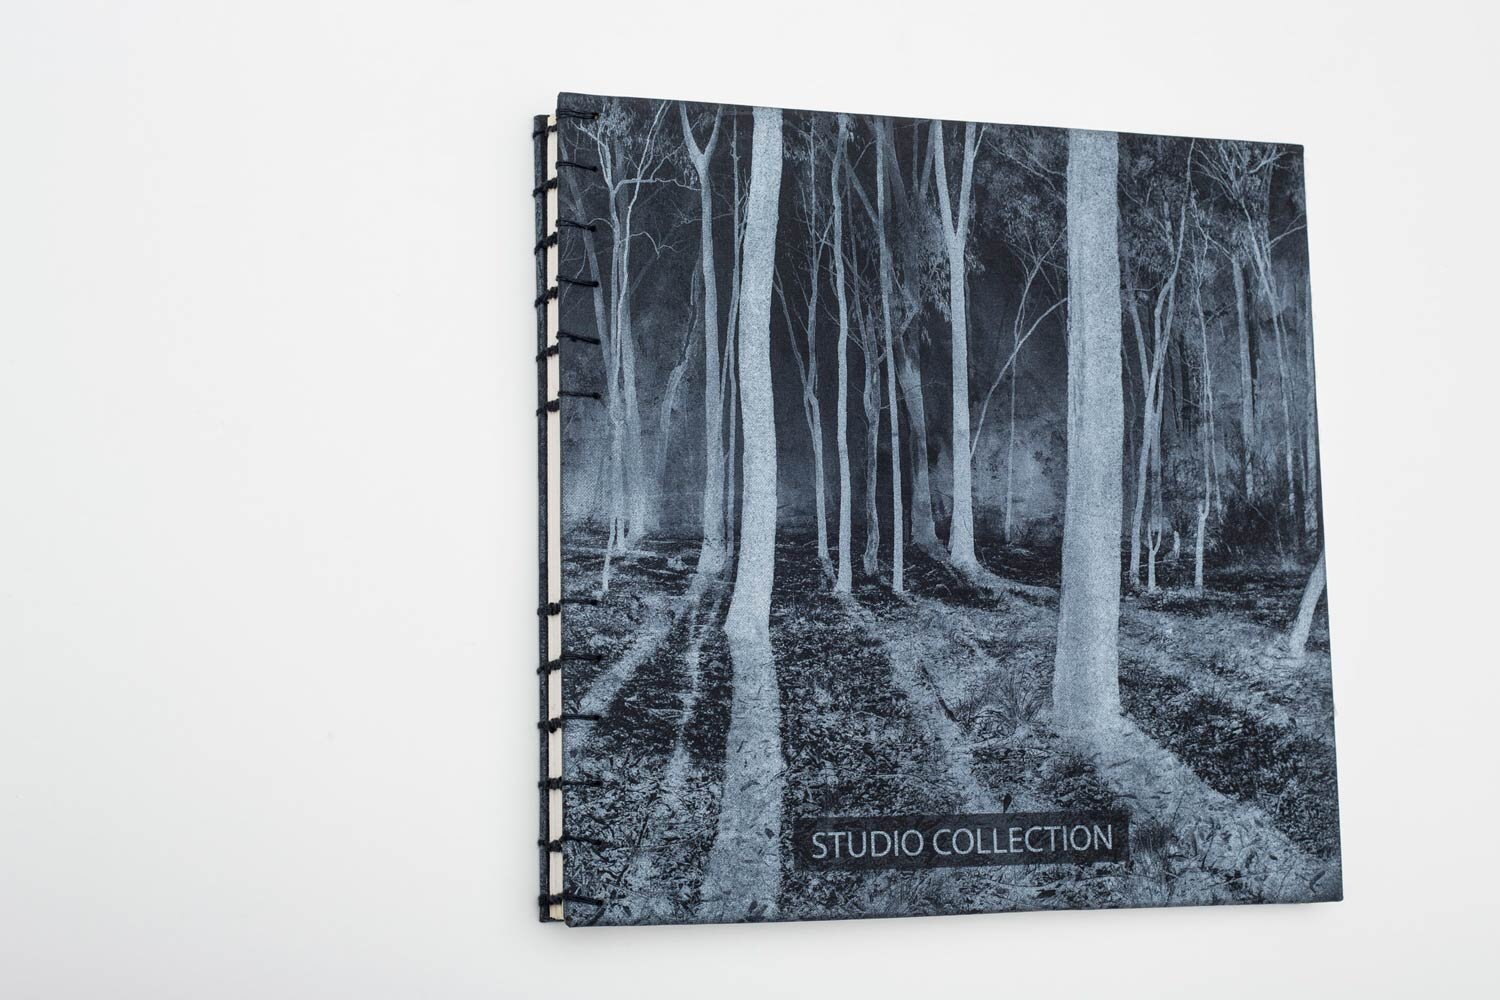 'Studio-Collection'-Artist-Book-29-x-29-x-20-cm.-Edition-of-3-with-one-artist-proof.jpg